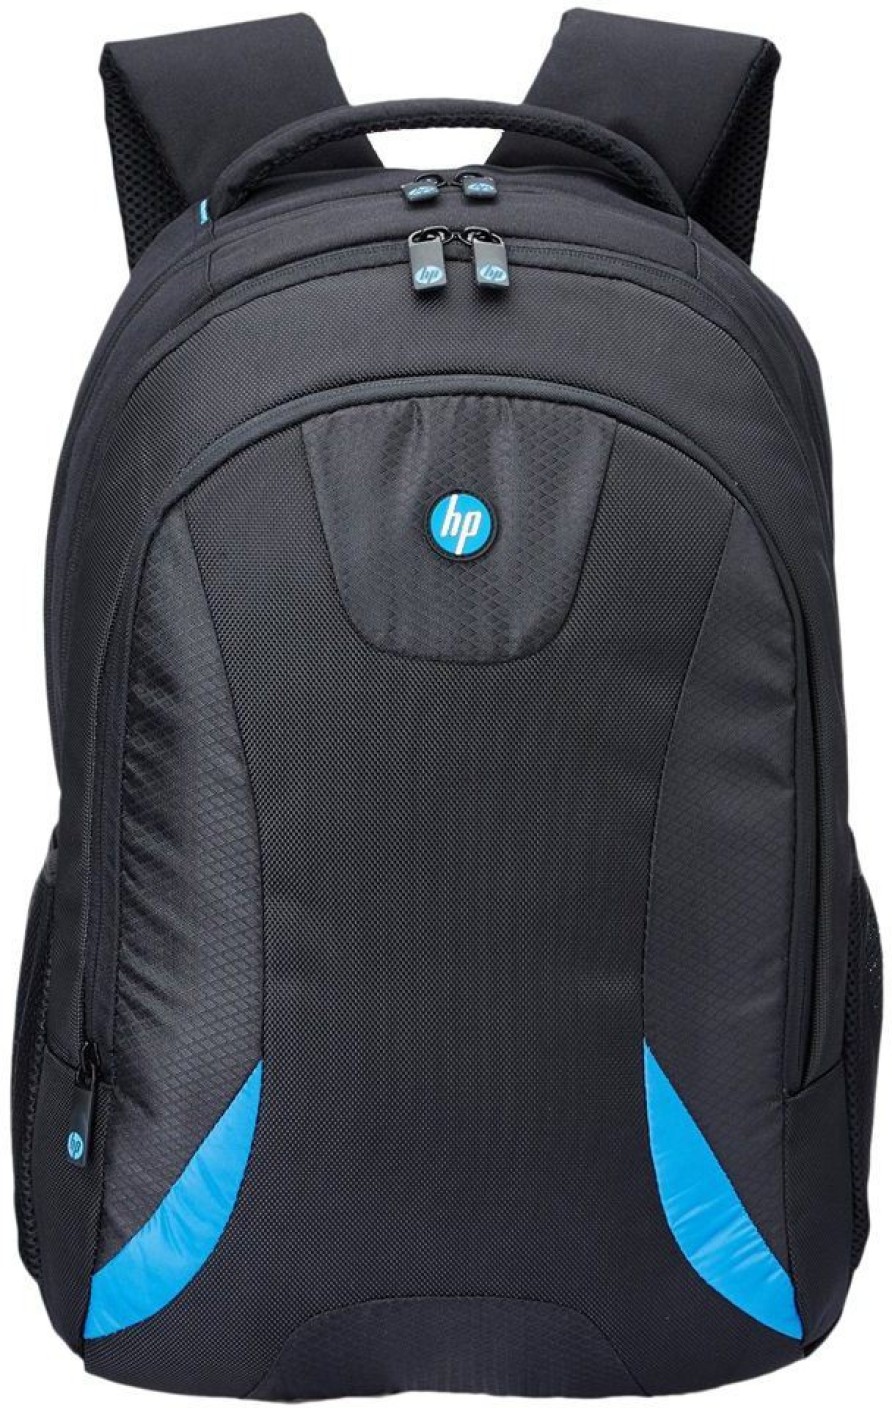 HP 18 inch Laptop Backpack Black - Price in India 